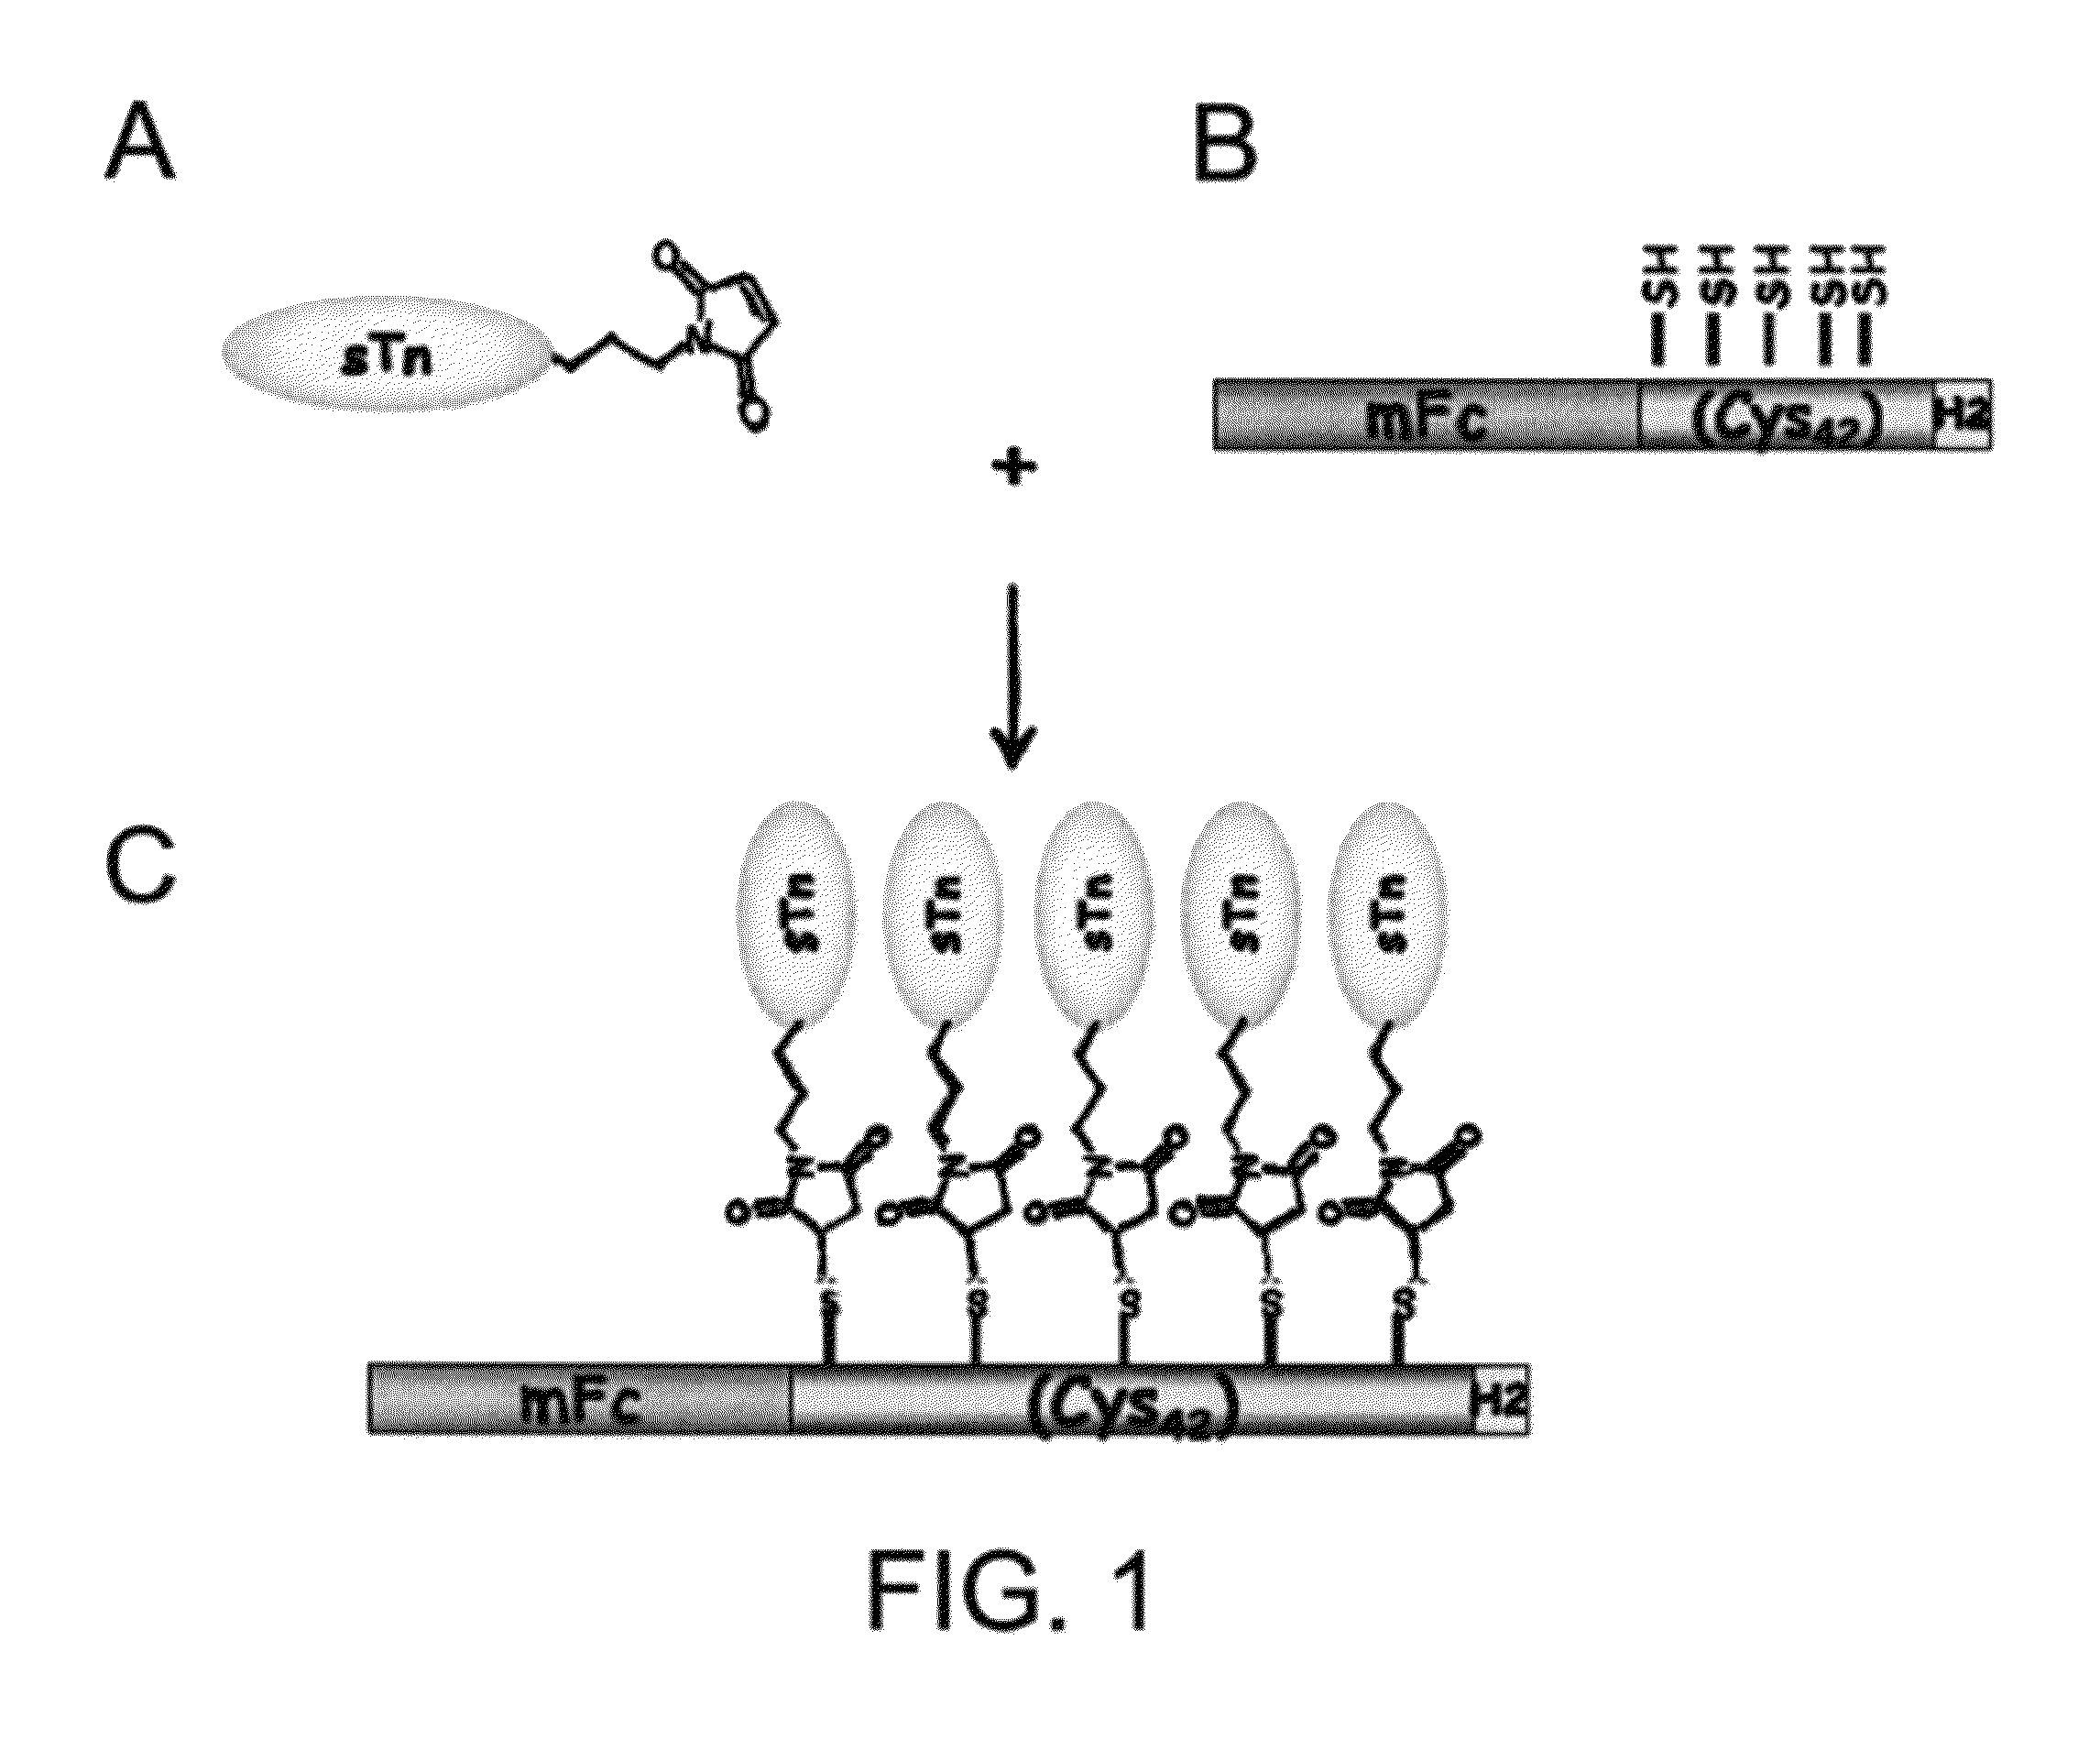 Immunogenic protein carrier containing an antigen presenting cell binding domain and a cysteine-rich domain